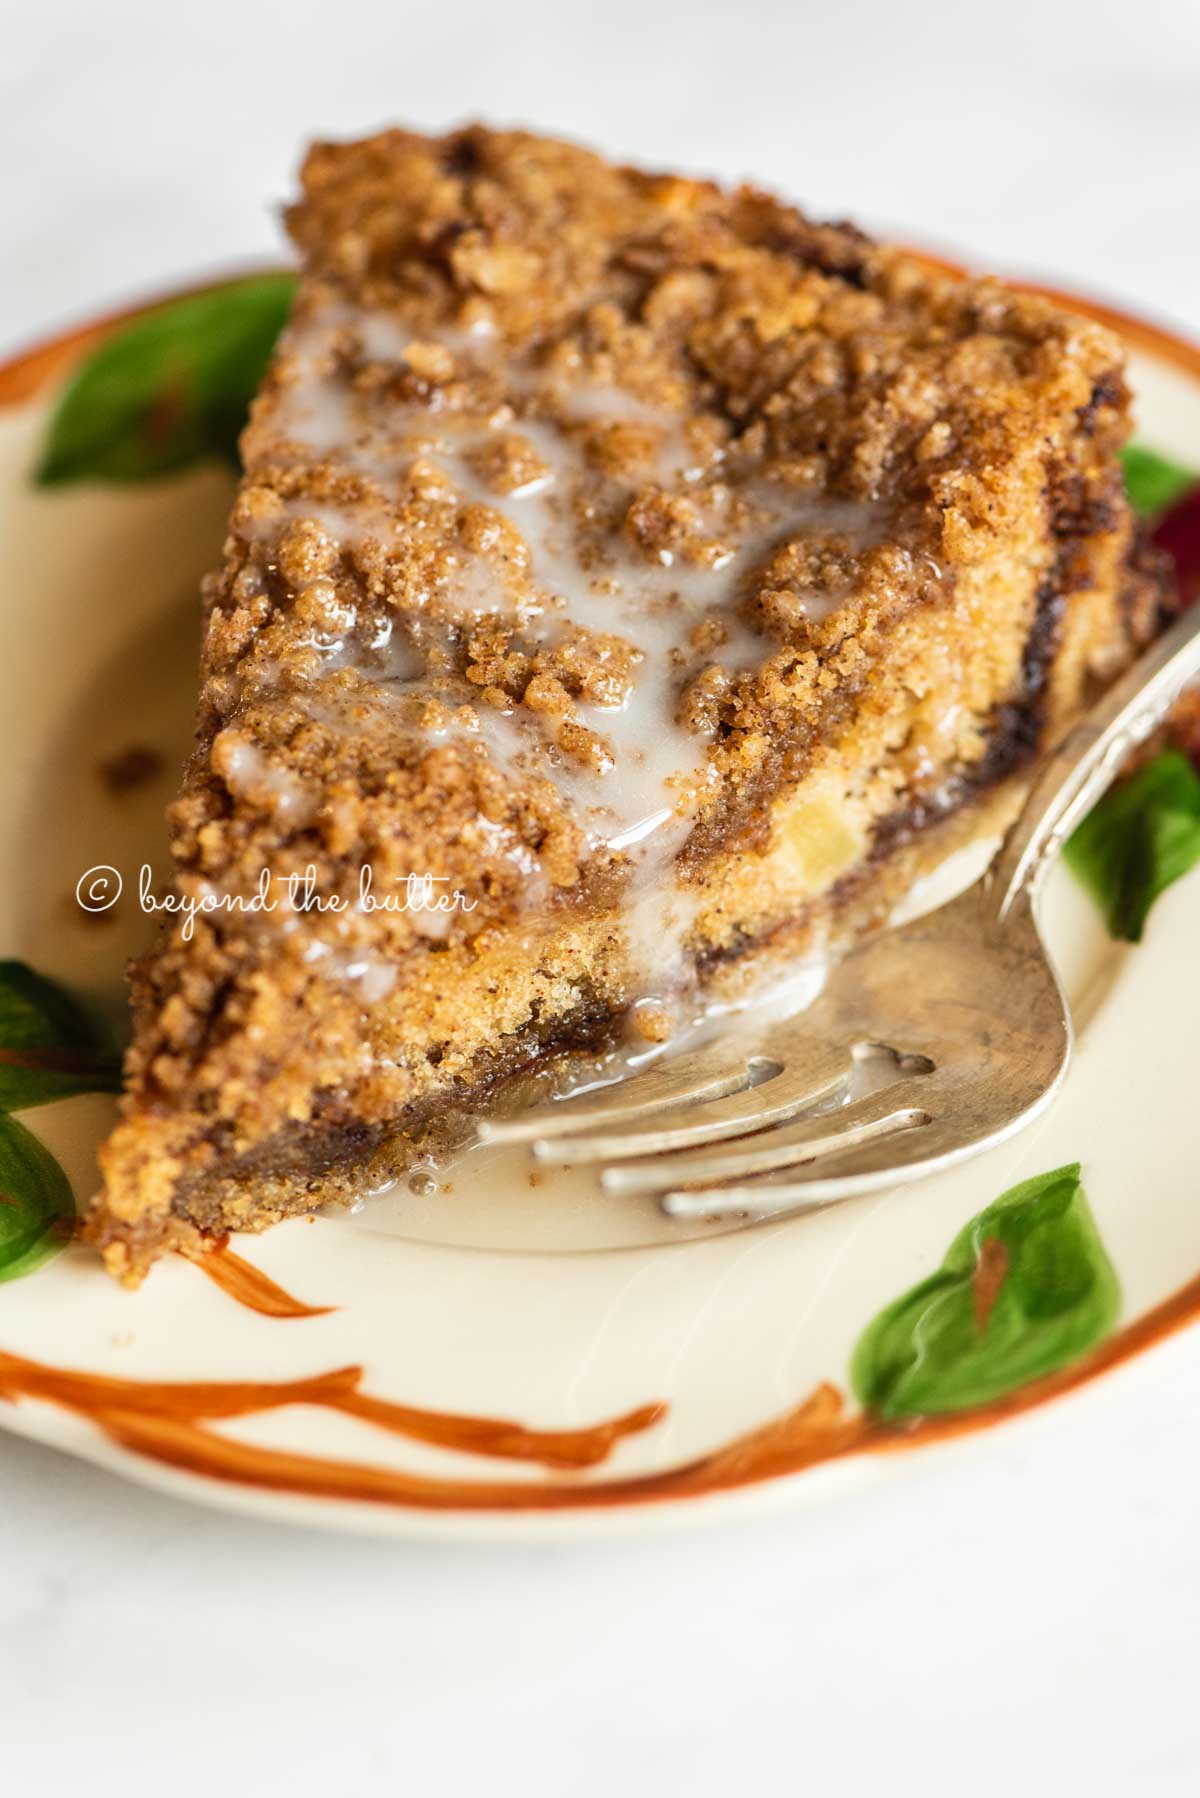 Slice of apple coffee cake on a dessert plate close up | All Images © Beyond the Butter™